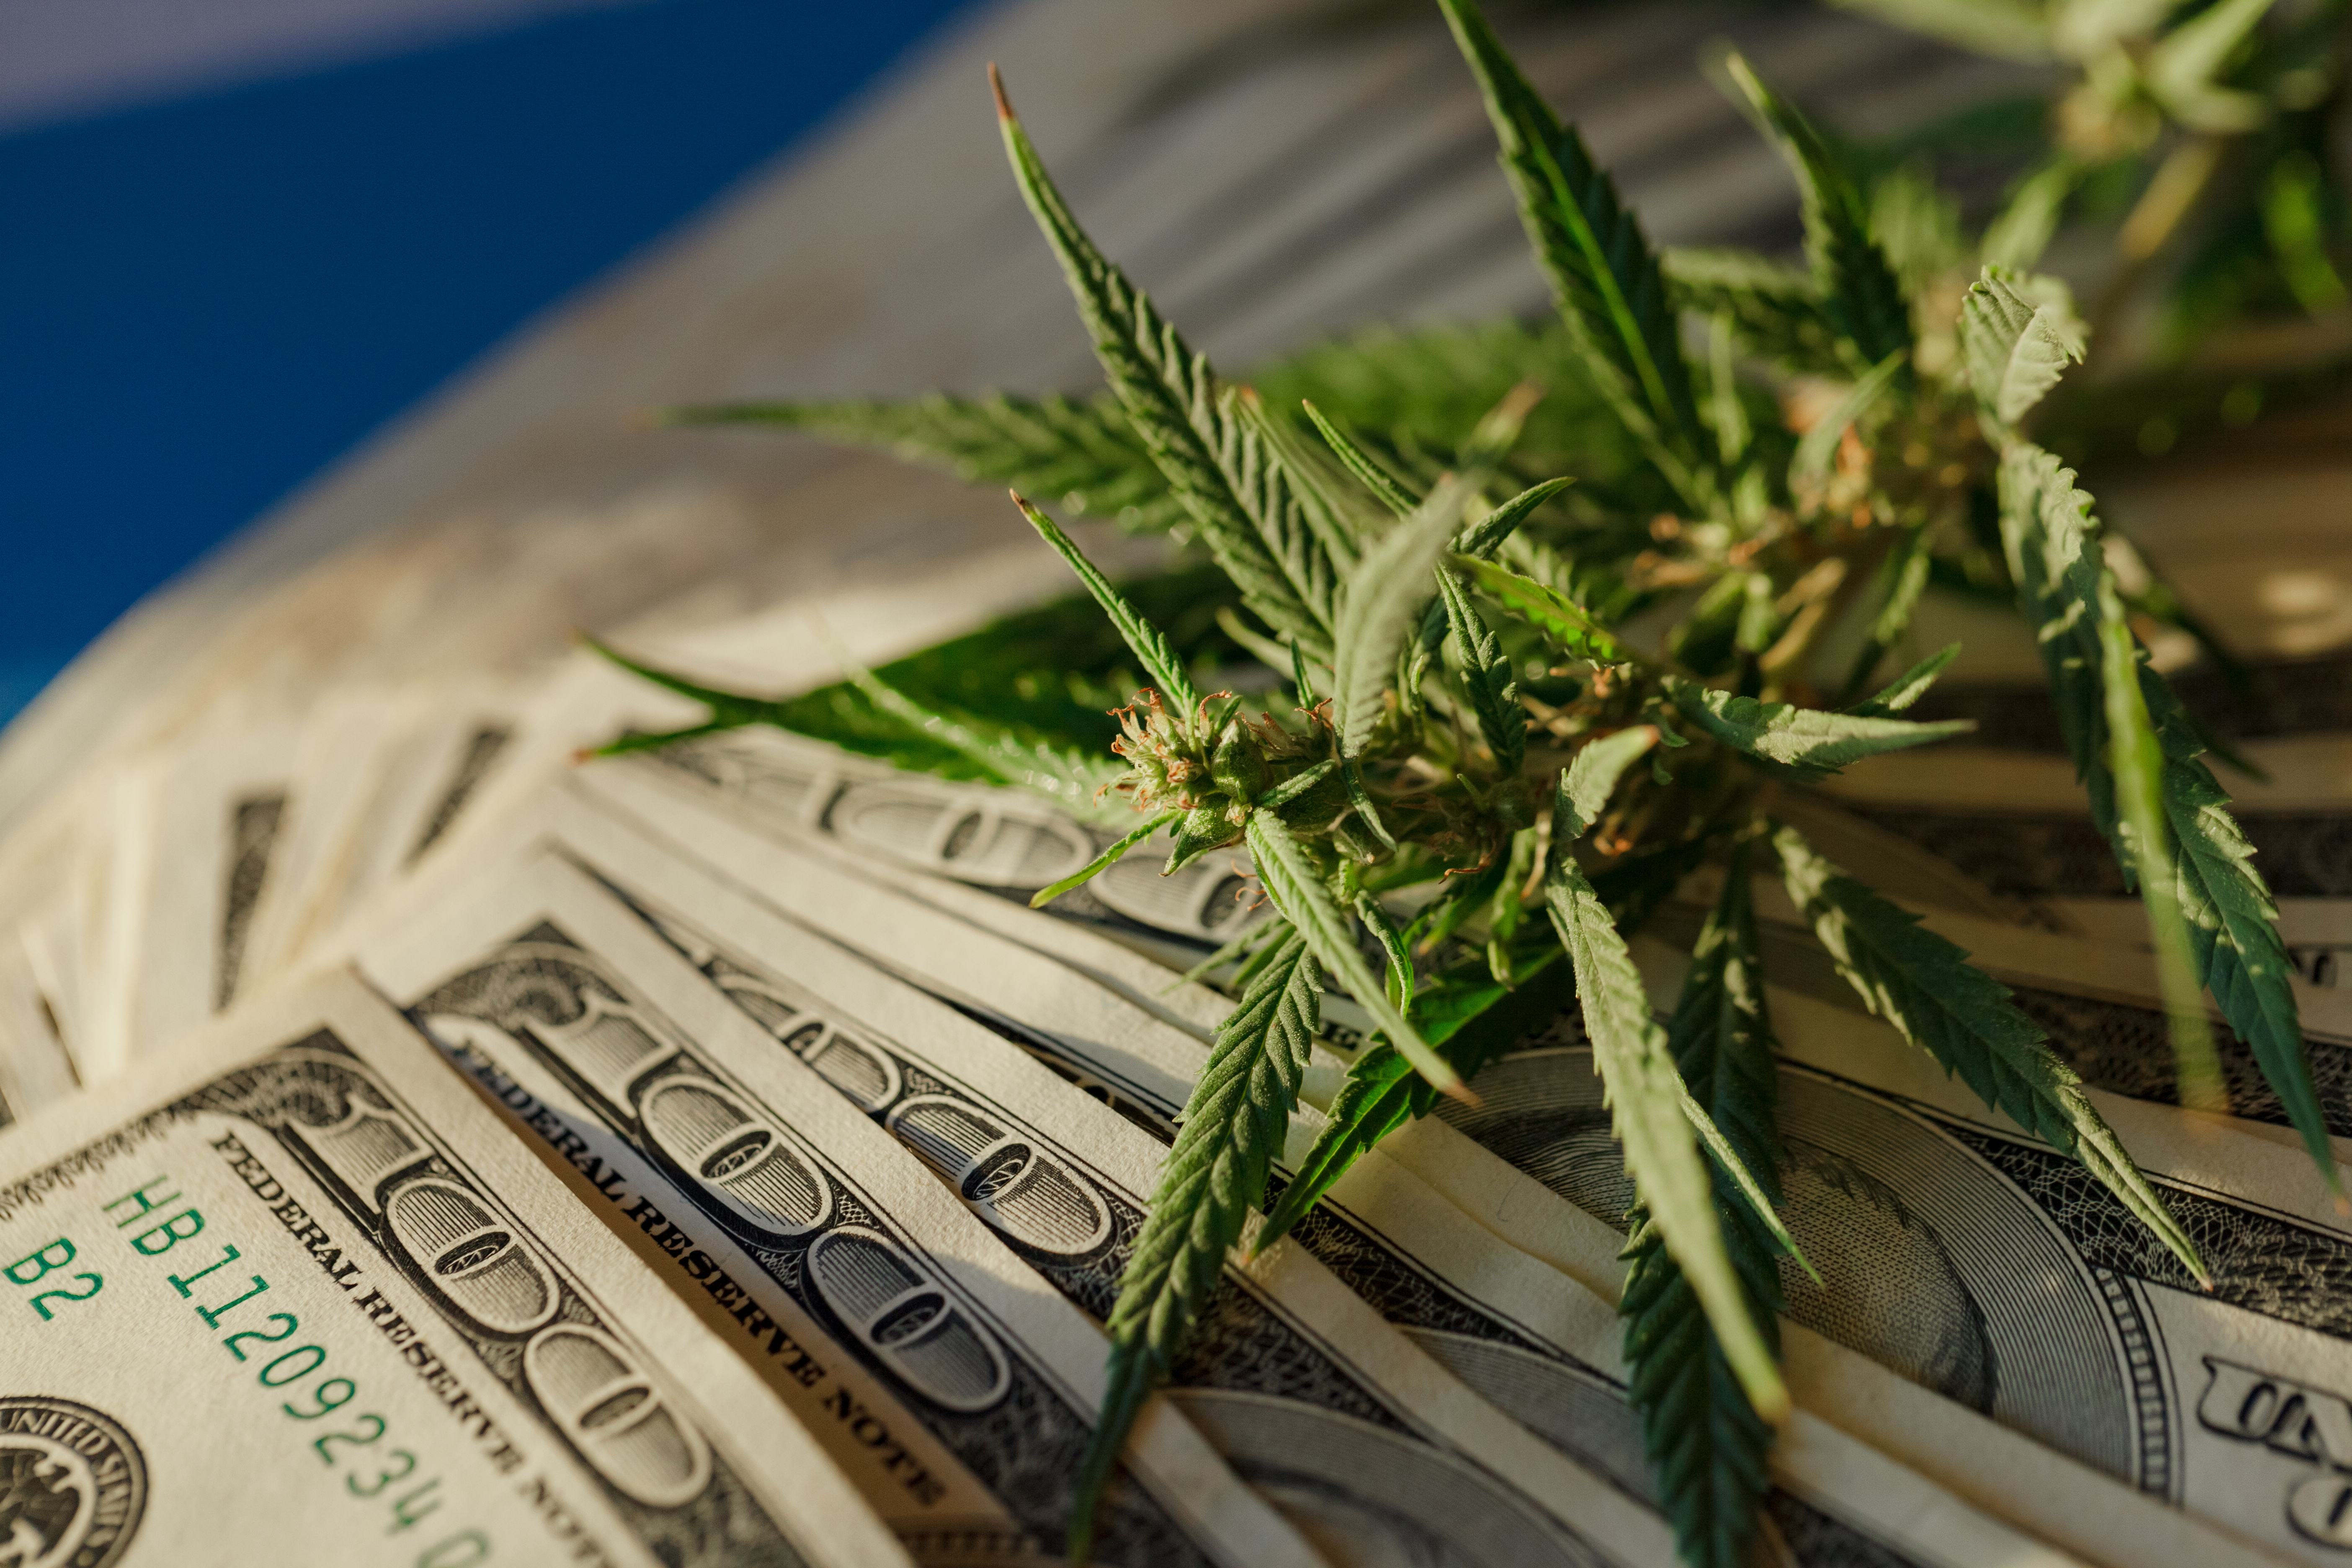 What's Standing in the Way of Cannabis Banking